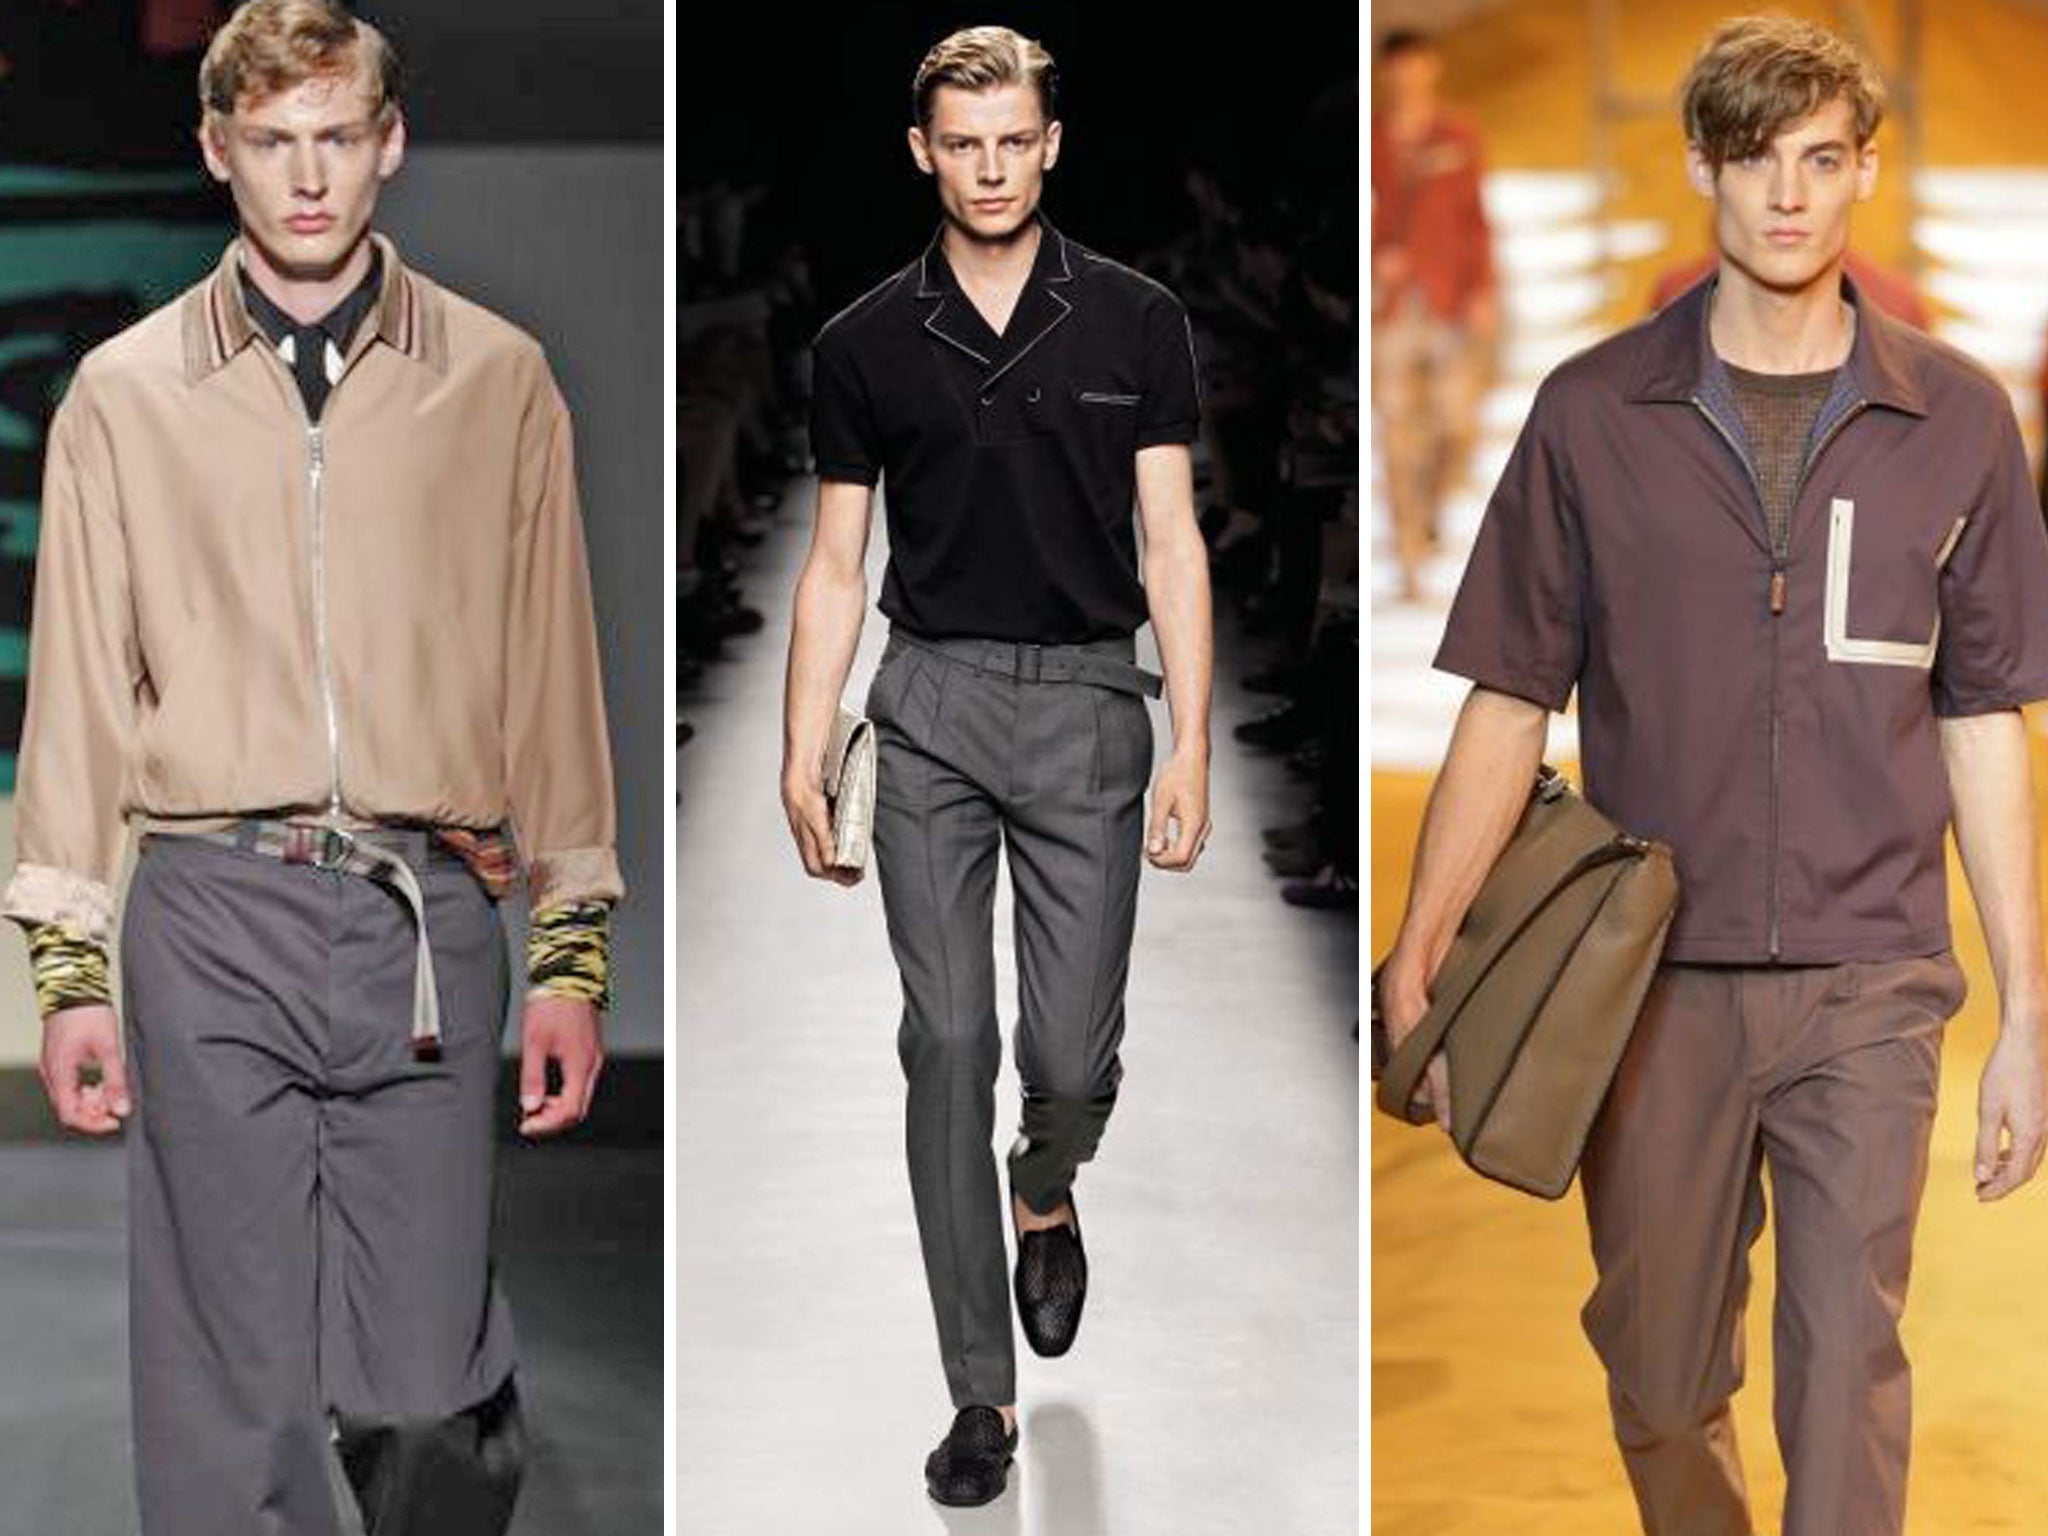 Fashion designers are tailoring their wares to the new emerging market of 'yummy' men